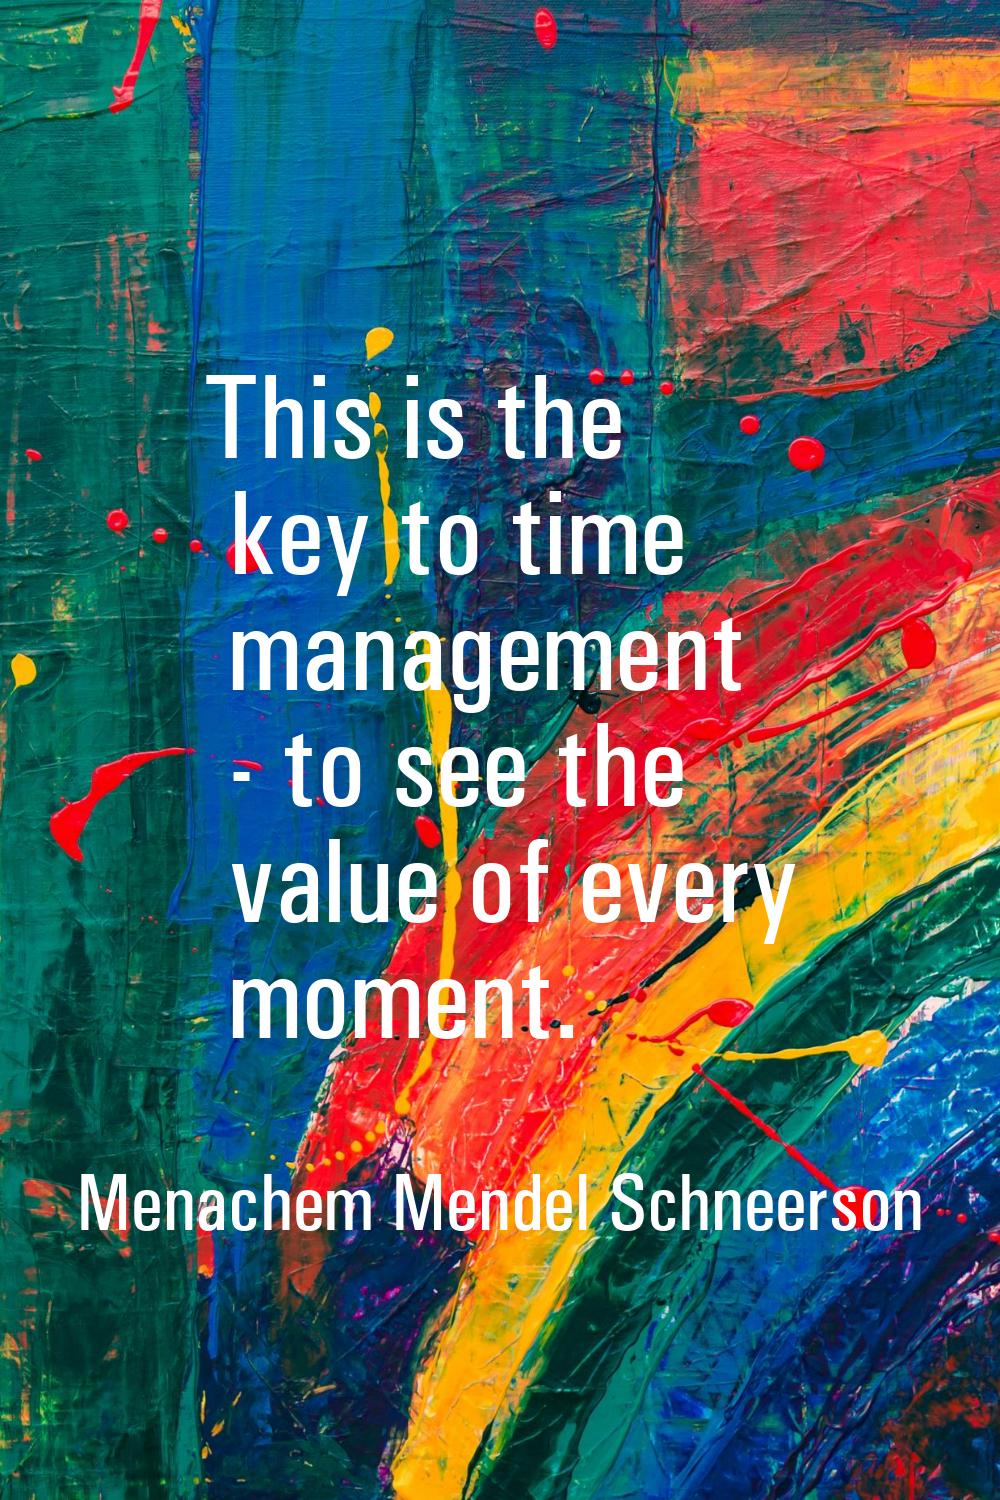 This is the key to time management - to see the value of every moment.